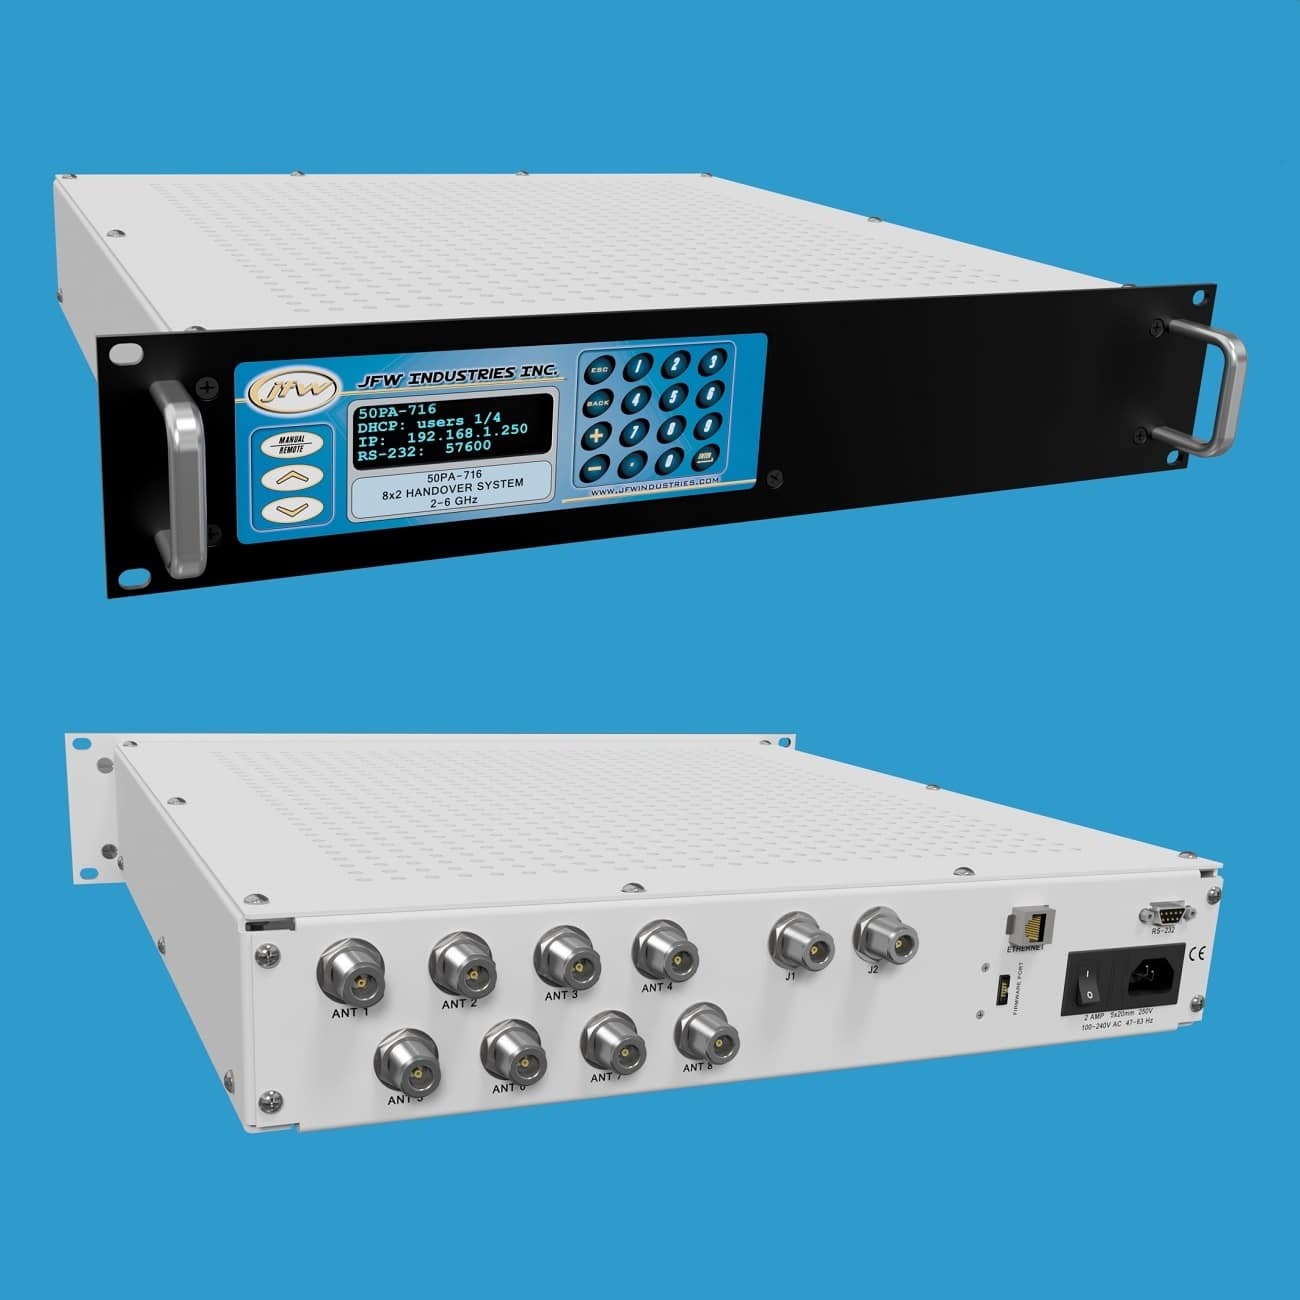 8 x 2 LC Handover Test System 2-6 GHz | 50PA-716 - JFW Industries